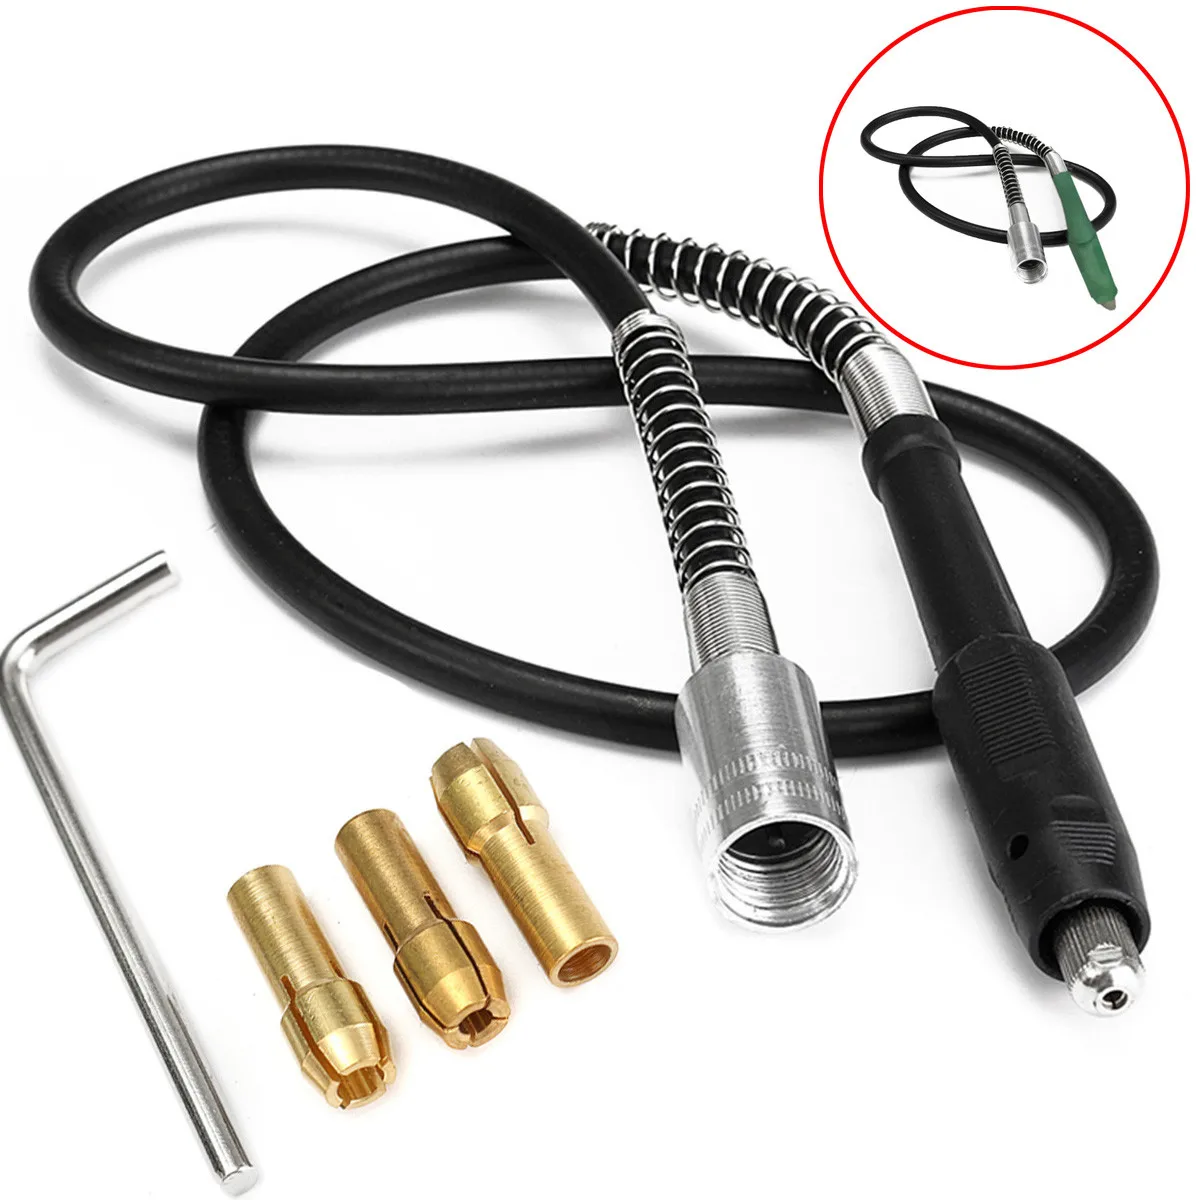 Enlarge Flexible Shaft+Sandwich+Wrench Electric Grinding Accessories Set Electric Flexible Shaft For Power Rotary Tools Accessories